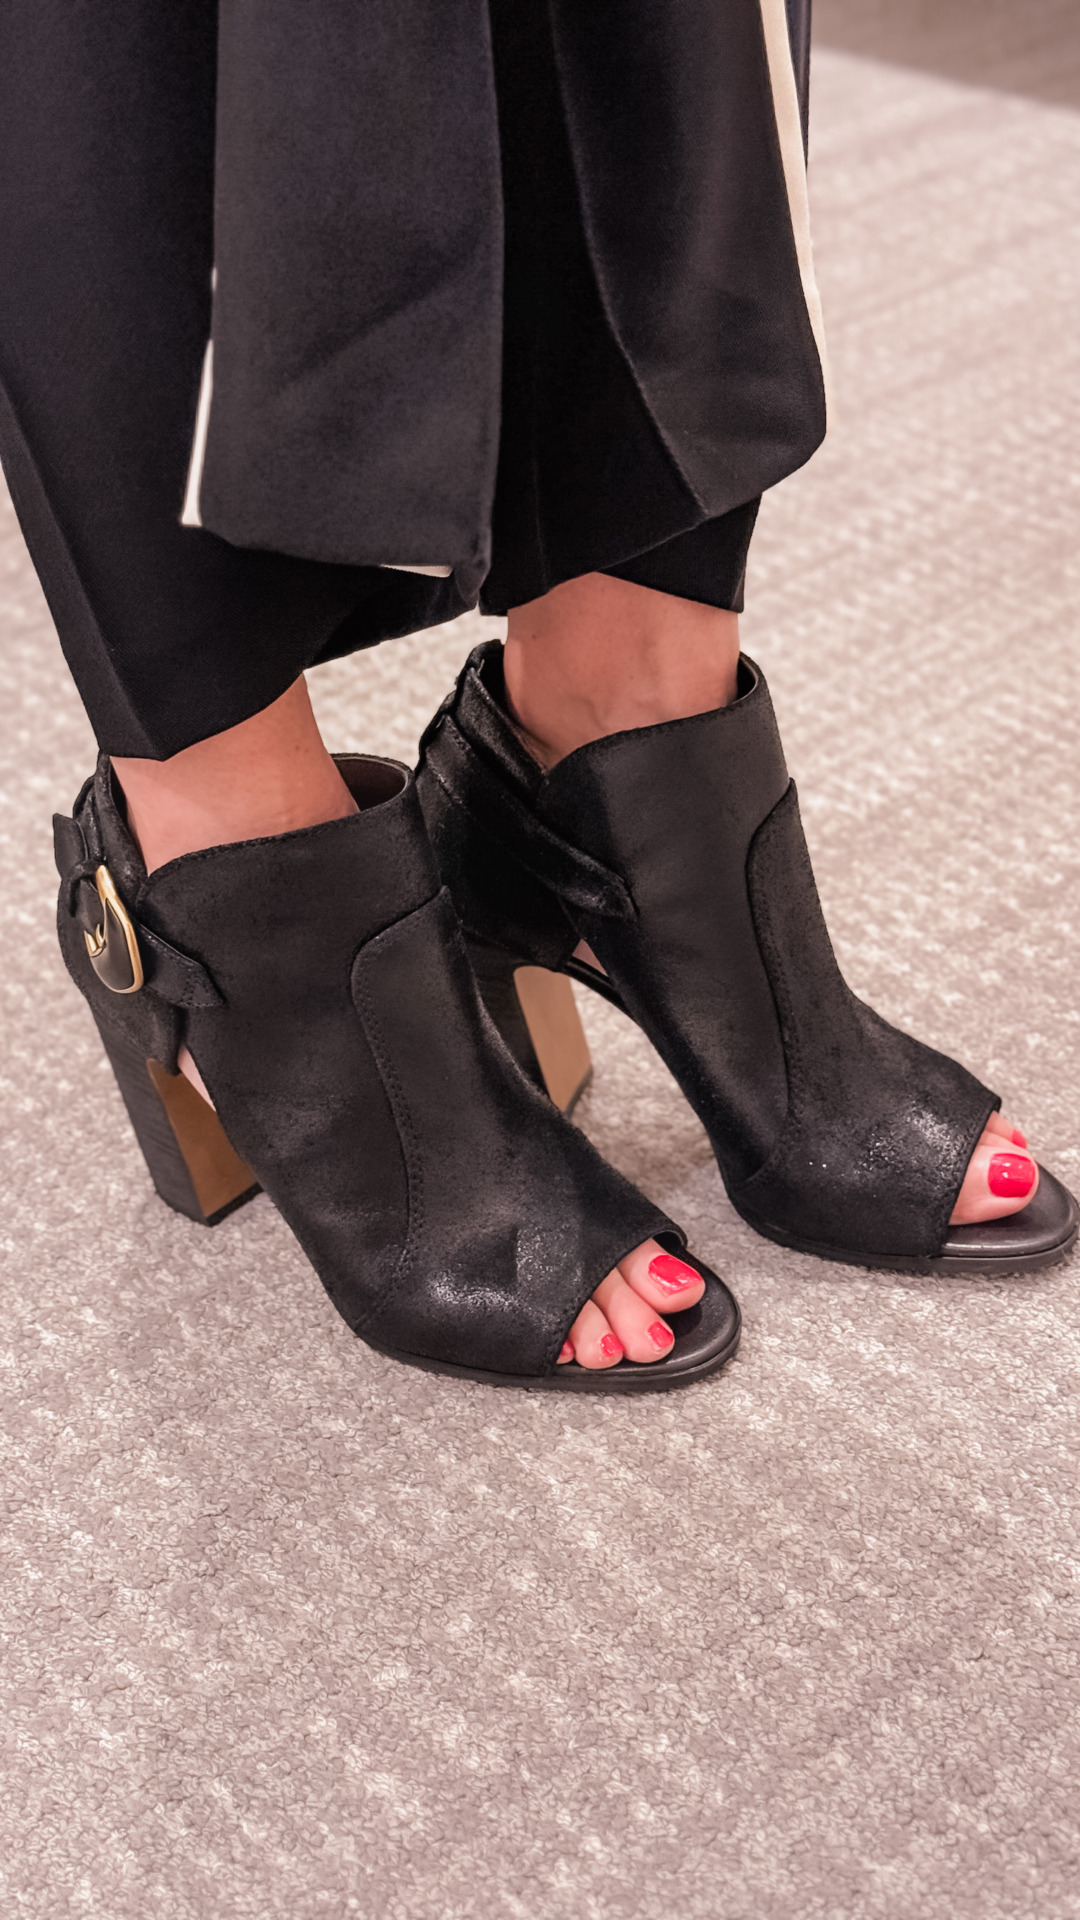 peep-toe booties by Vince Camuto | Nordstrom Sale Outfits